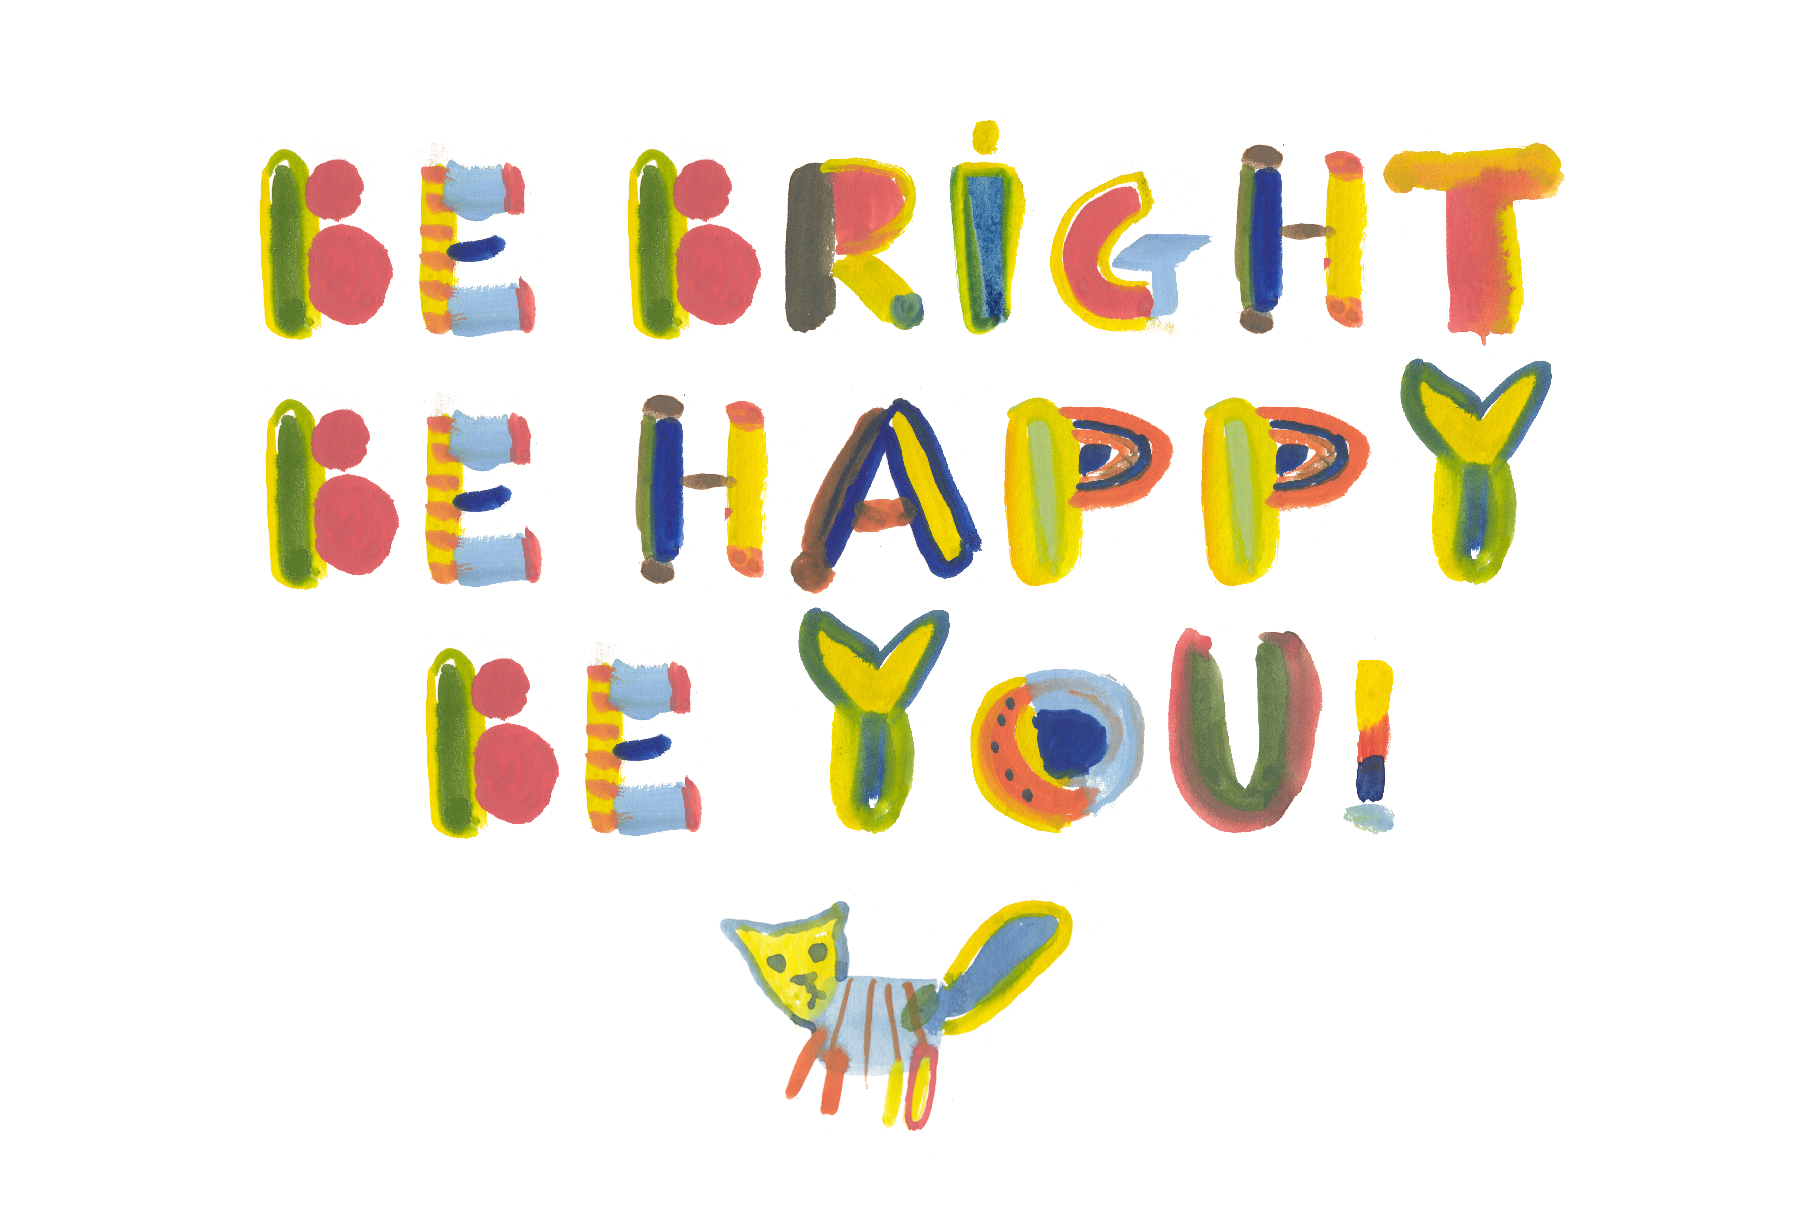 Make your bright business and be happy.